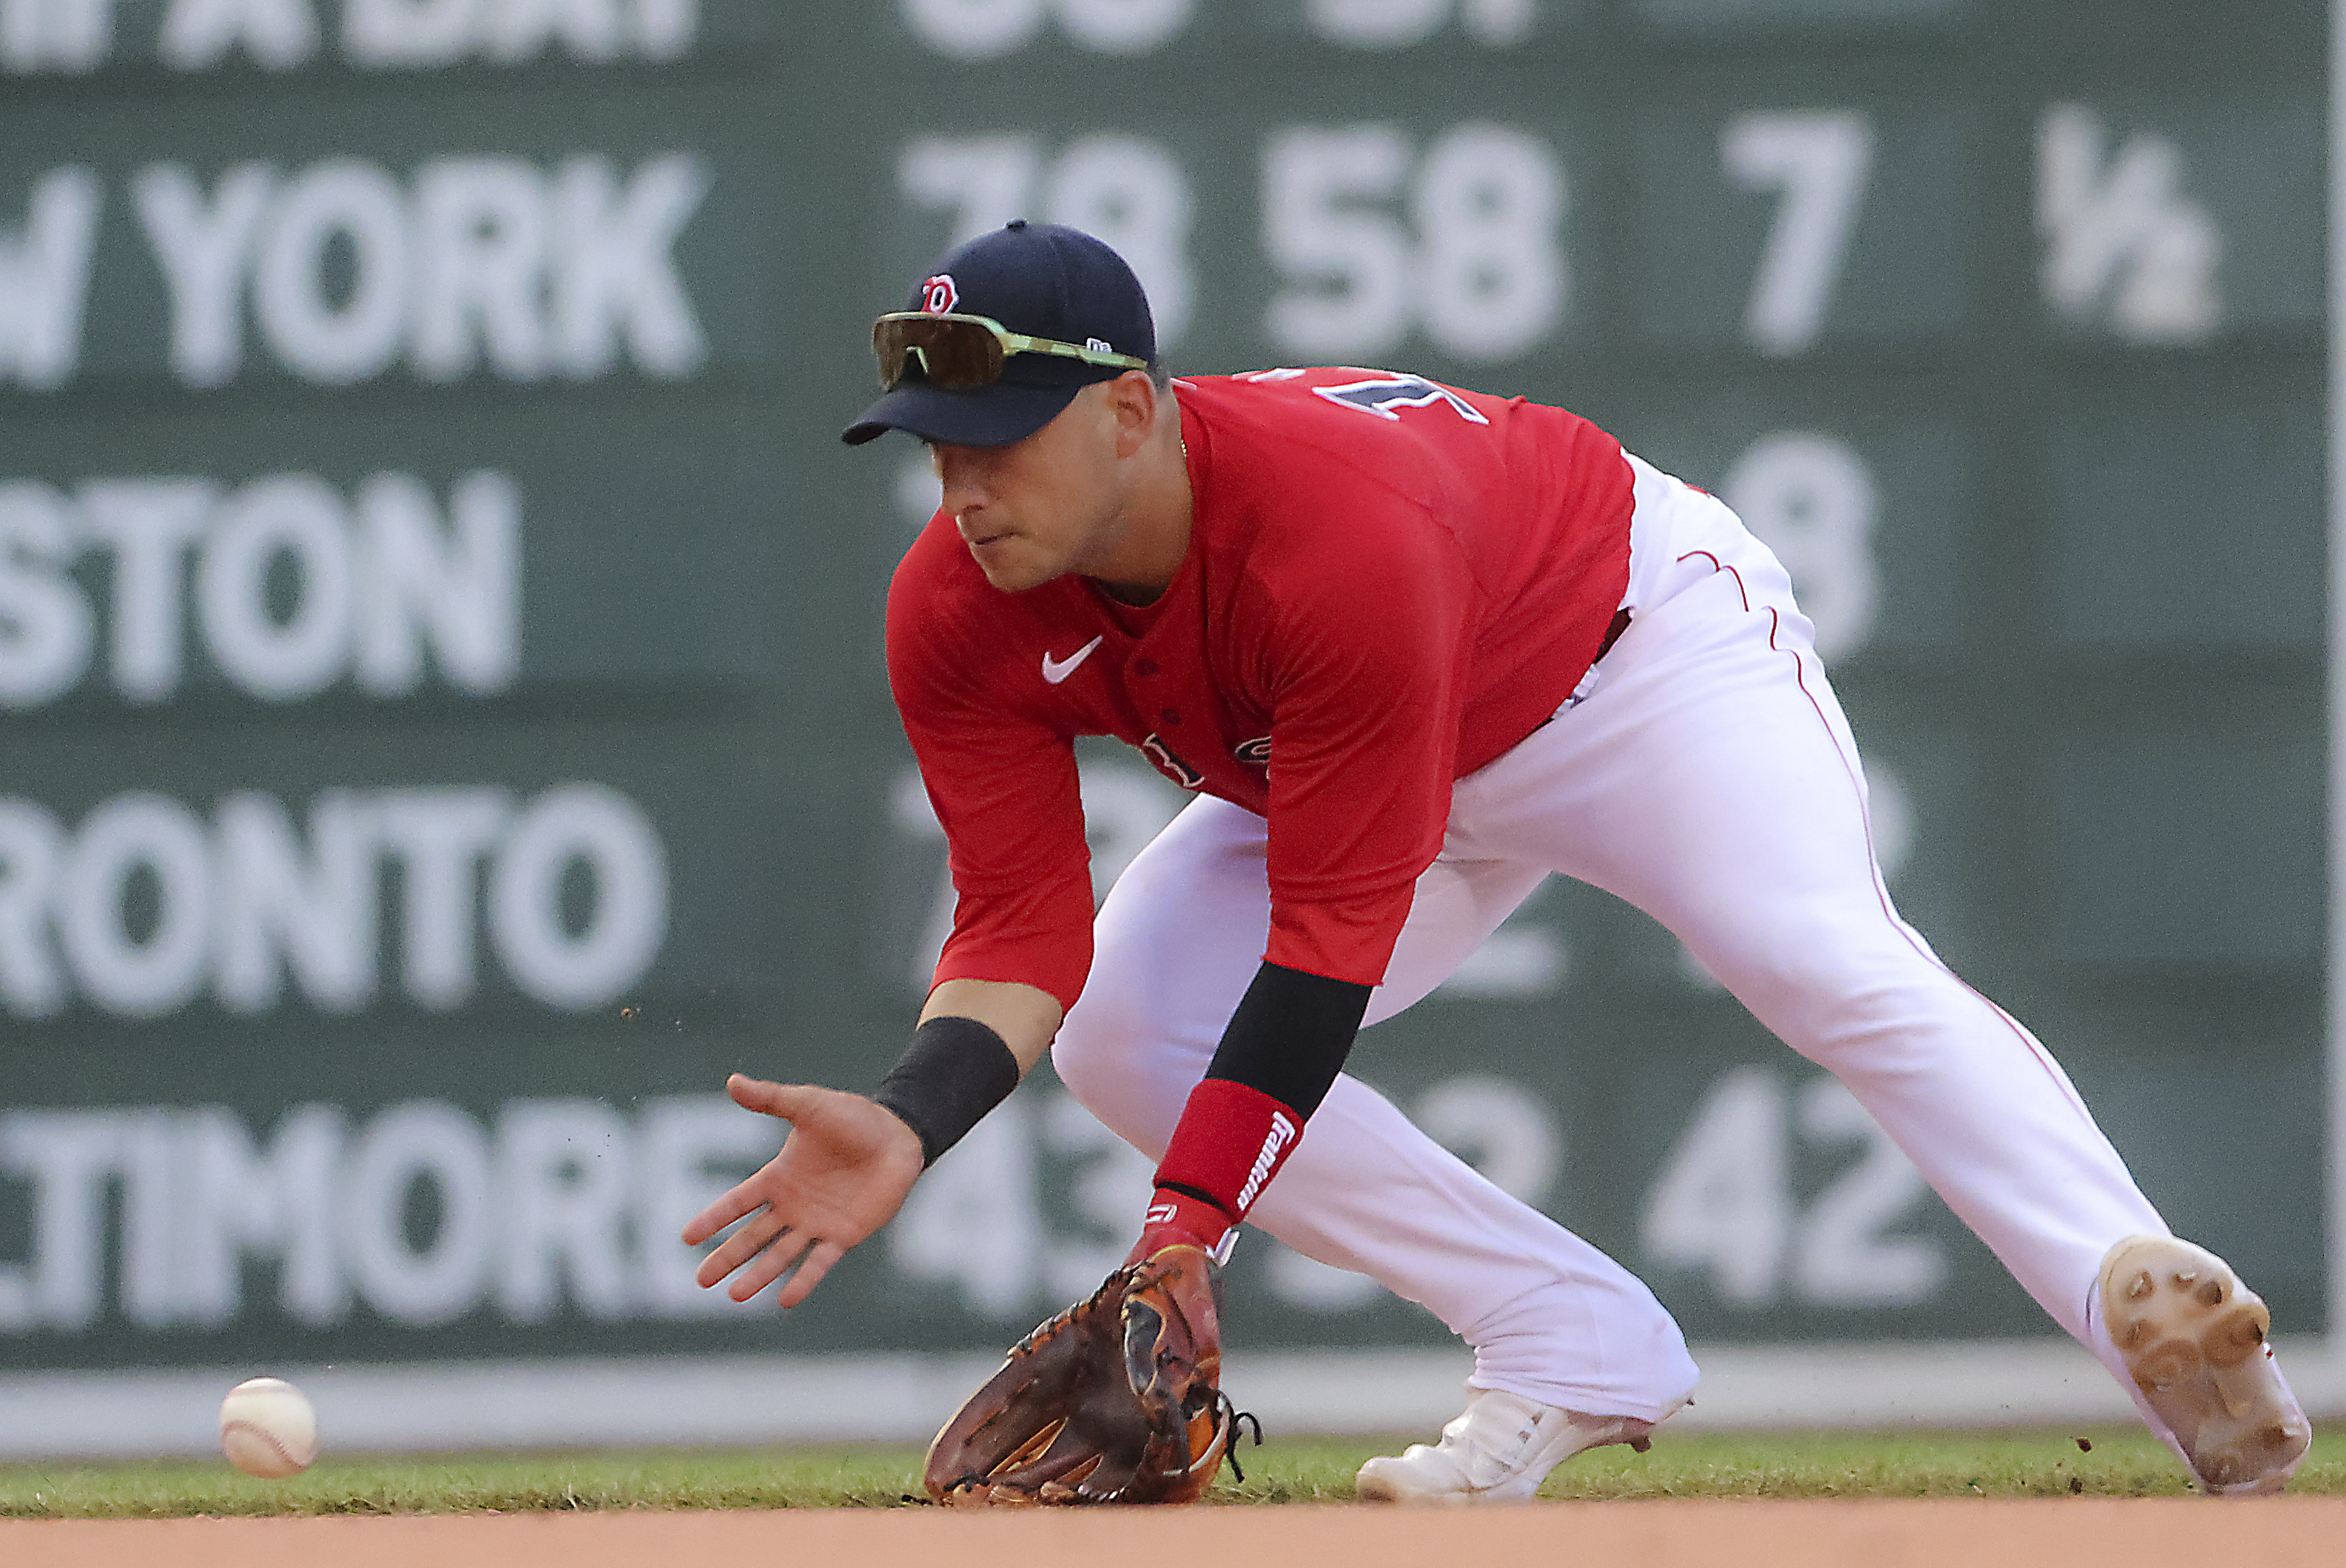 Jose Iglesias handling pressure of being top Red Sox prospect